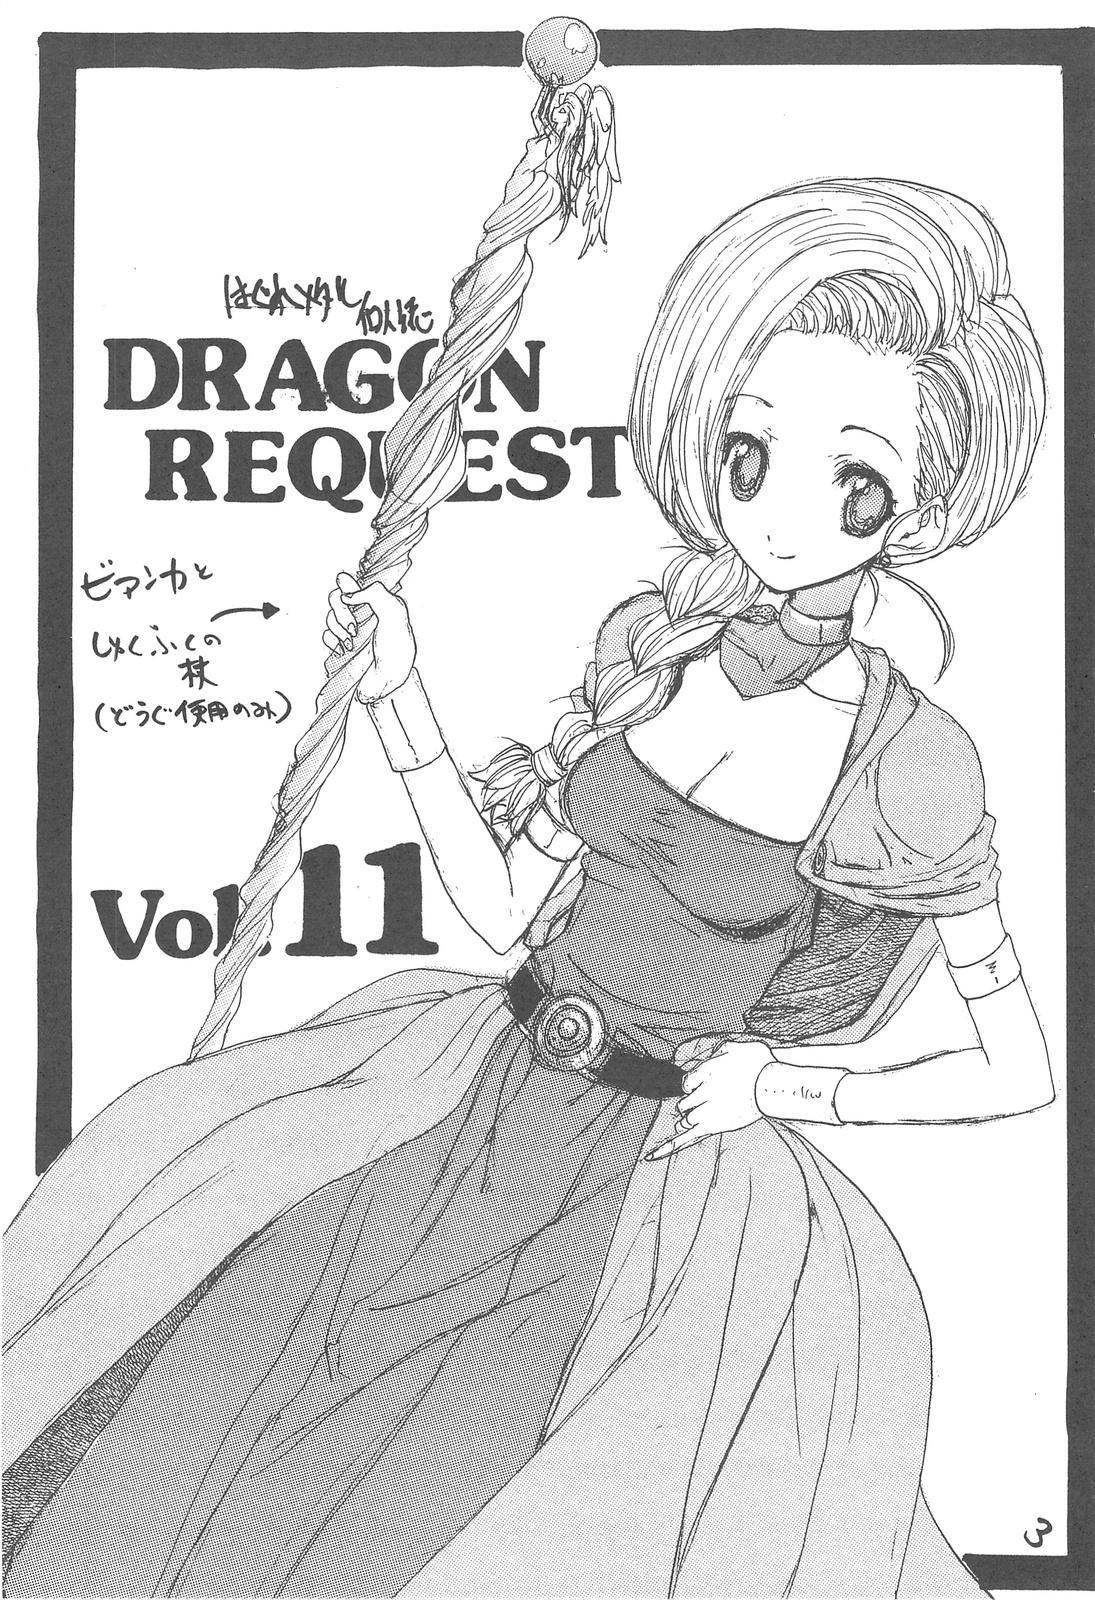 Old Young DRAGON REQUEST Vol. 11 - Dragon quest v Naked Sex - Page 2